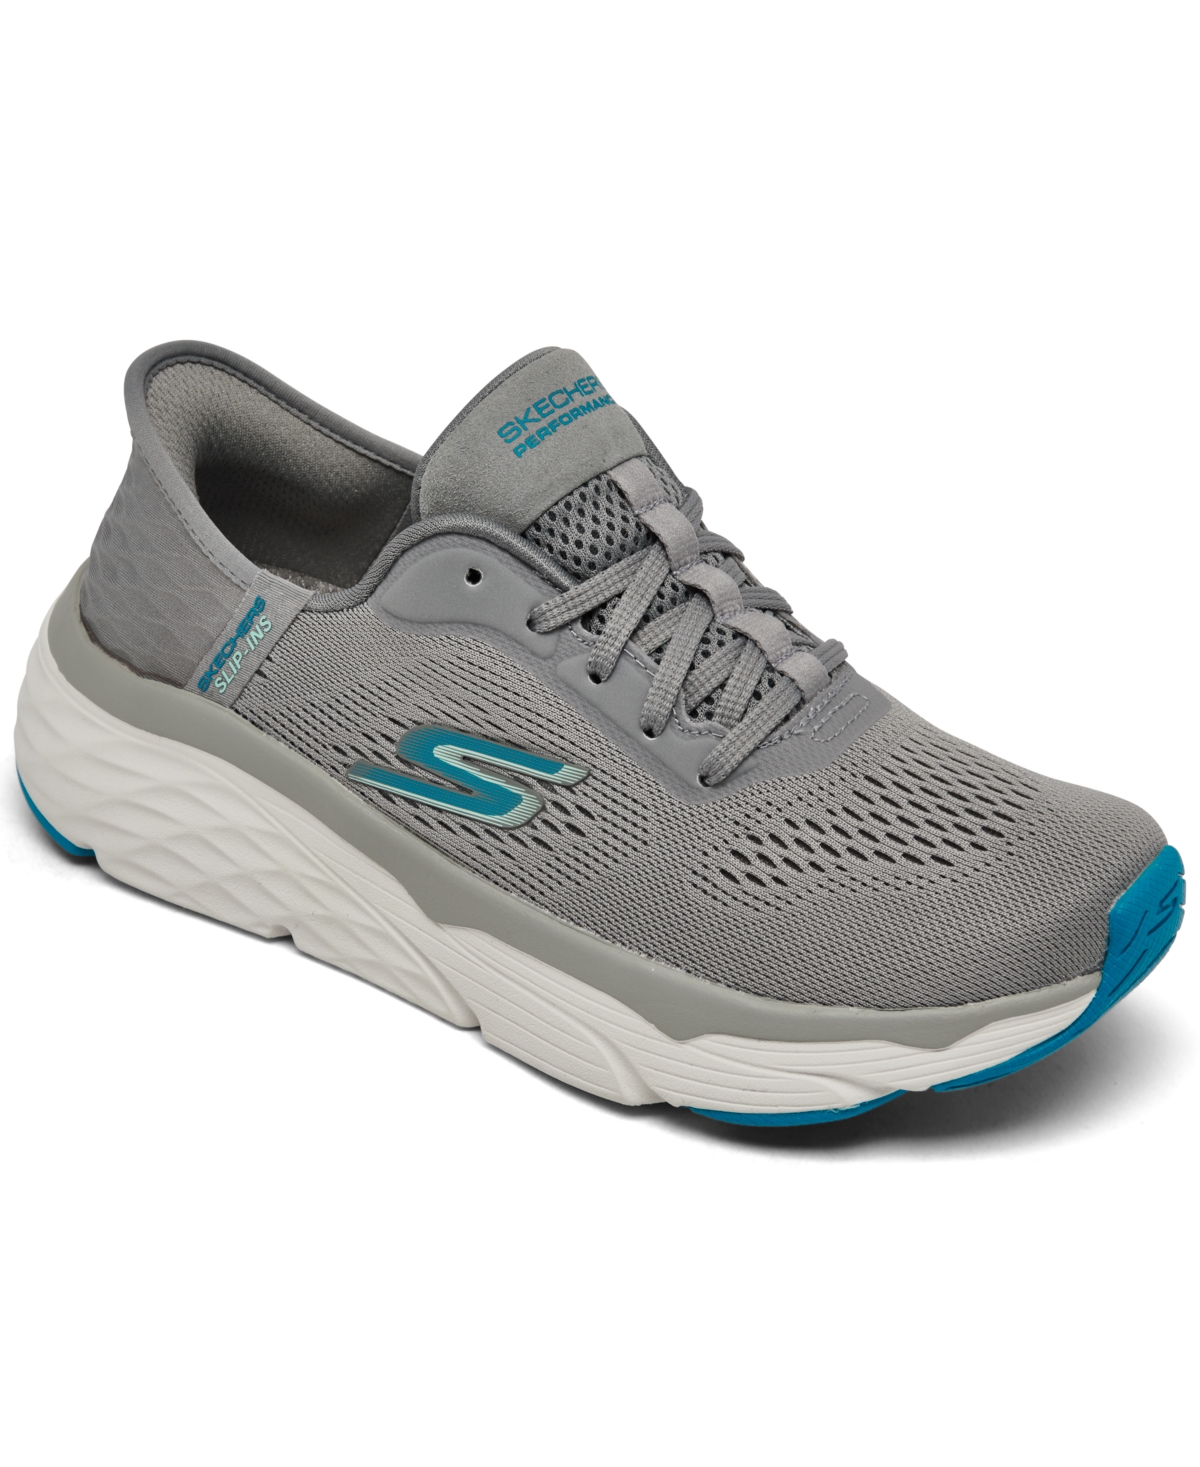 Women's Slip-ins Max Cushioning Walking Sneakers from Finish Line - Charcoal/Teal